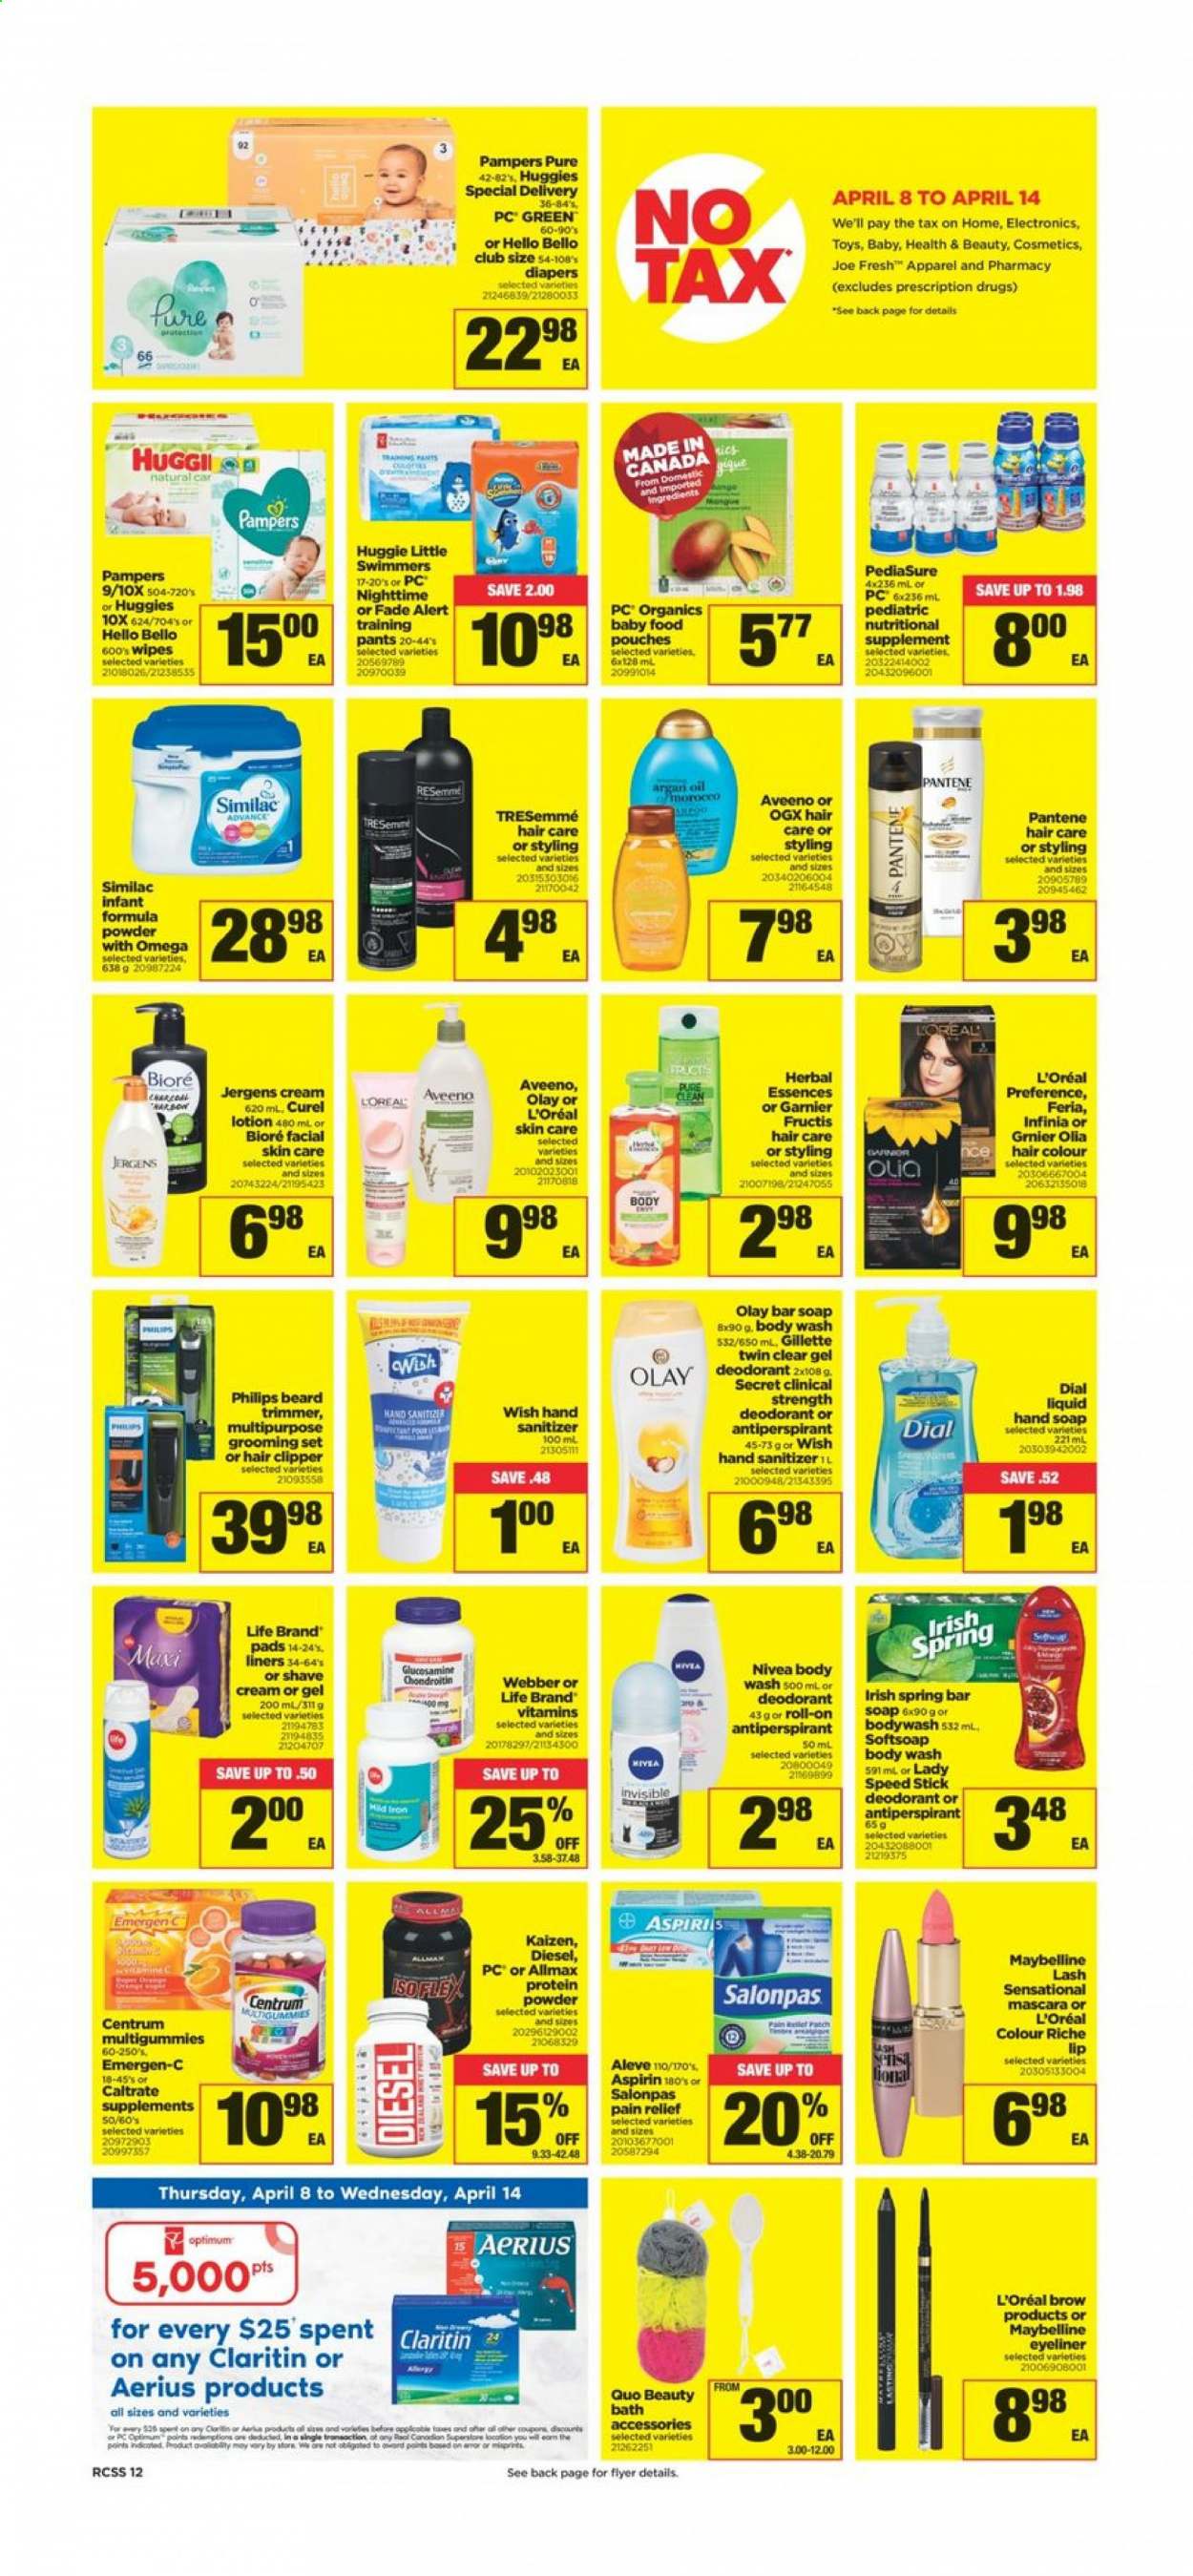 thumbnail - Circulaire Real Canadian Superstore - 08 Avril 2021 - 14 Avril 2021 - Produits soldés - Philips, pain, mangue, déodorant, Fructis, Garnier, Gillette, Huggies, Maybelline, Nivea, Pampers, Pantene, roll-on, mascara. Page 12.